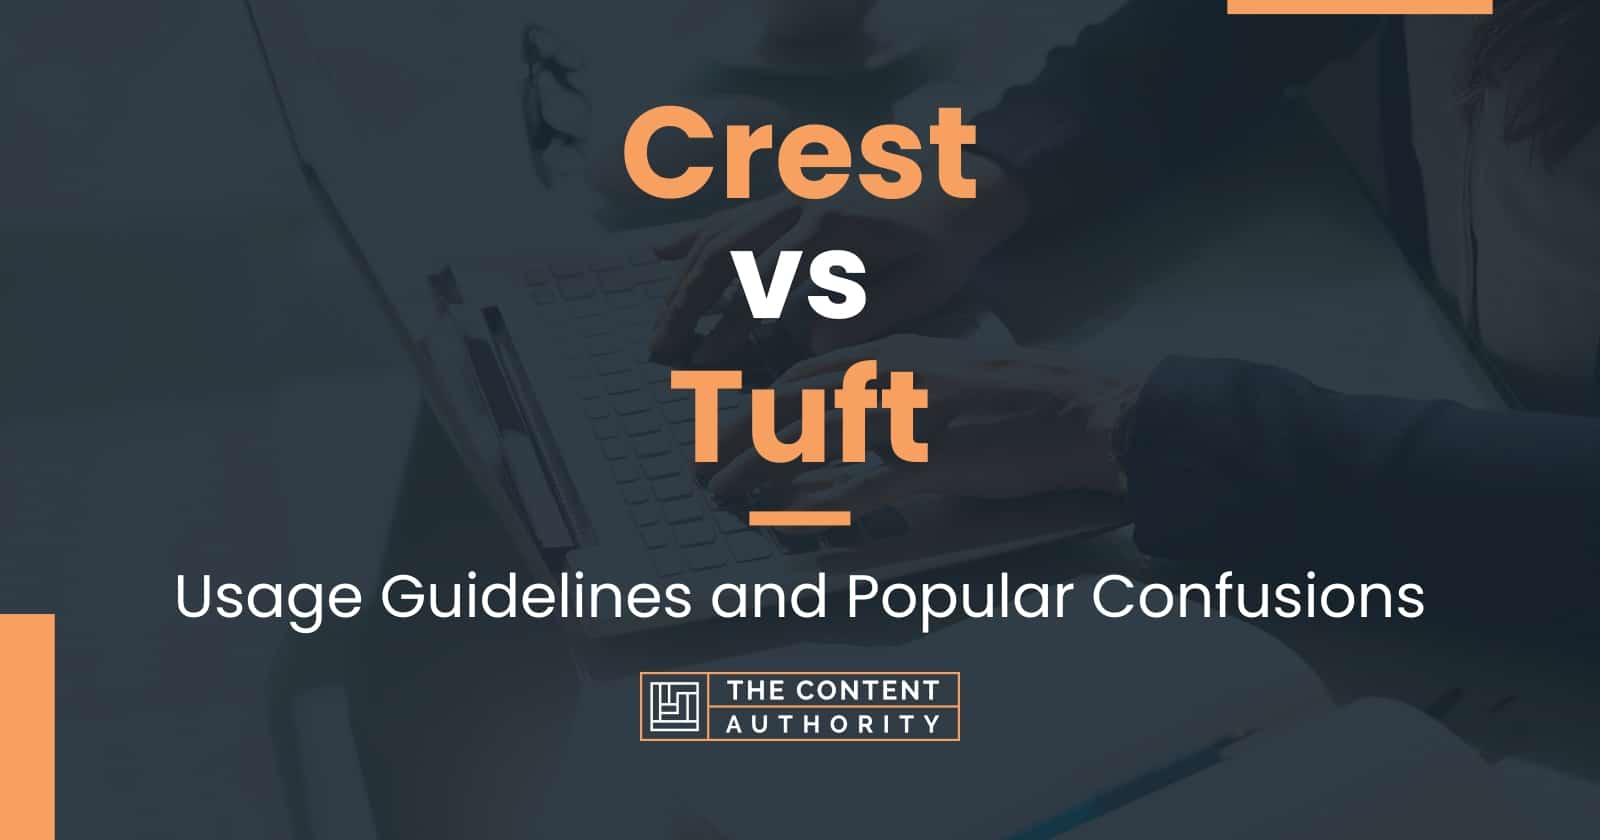 Crest vs Tuft: Usage Guidelines and Popular Confusions